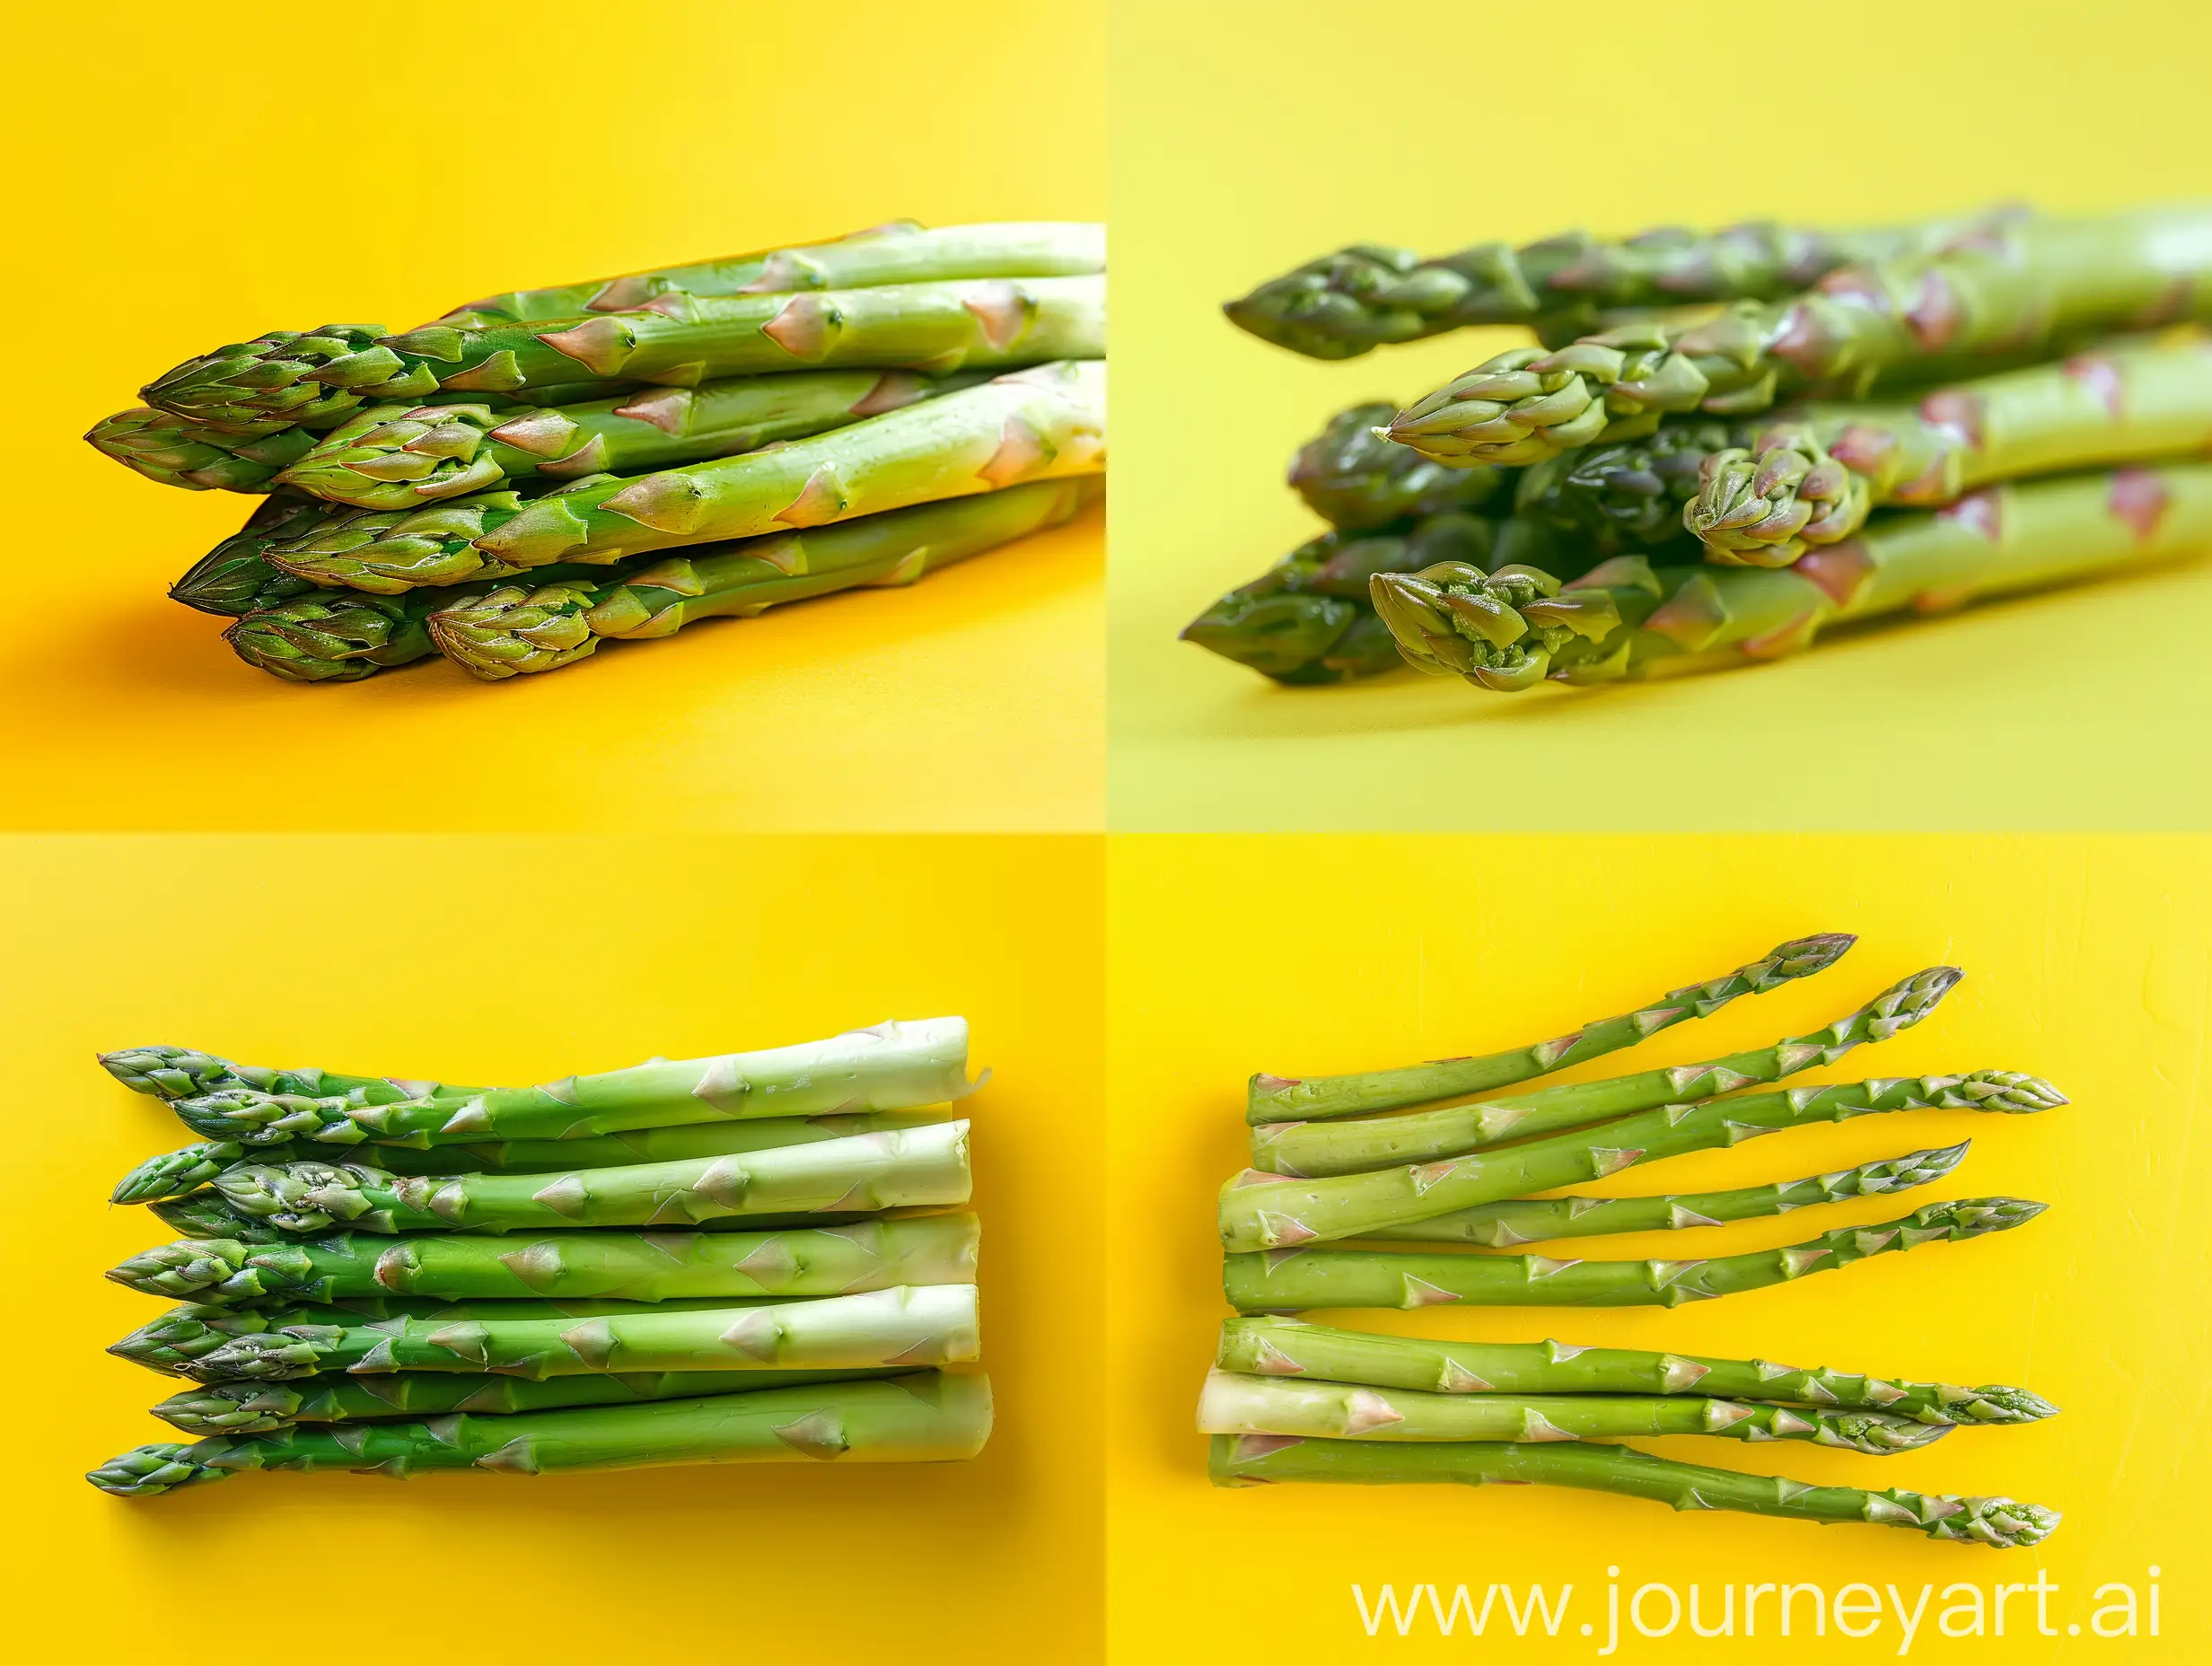 Studio photo with a bright yellow background of asparagus